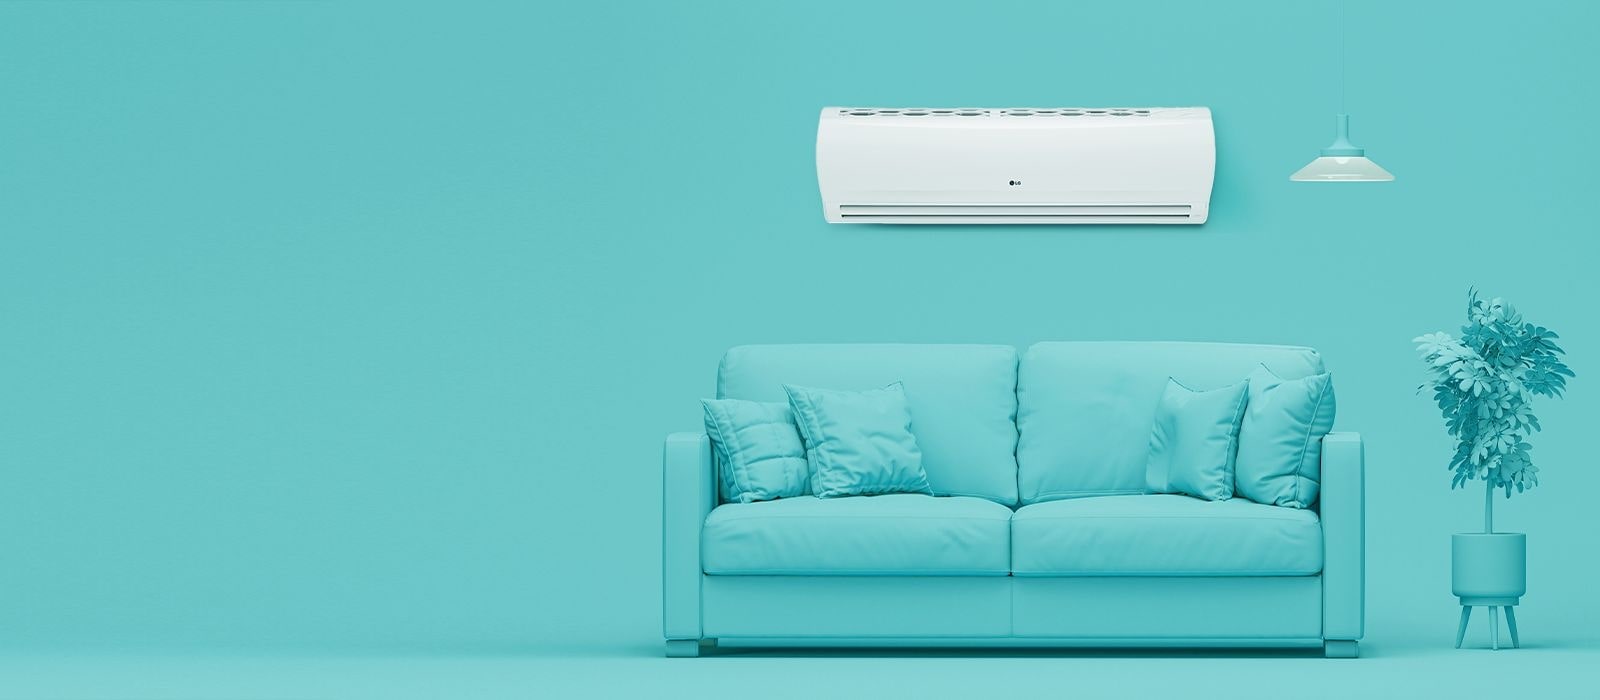 Modern living room with a LG air conditioner.